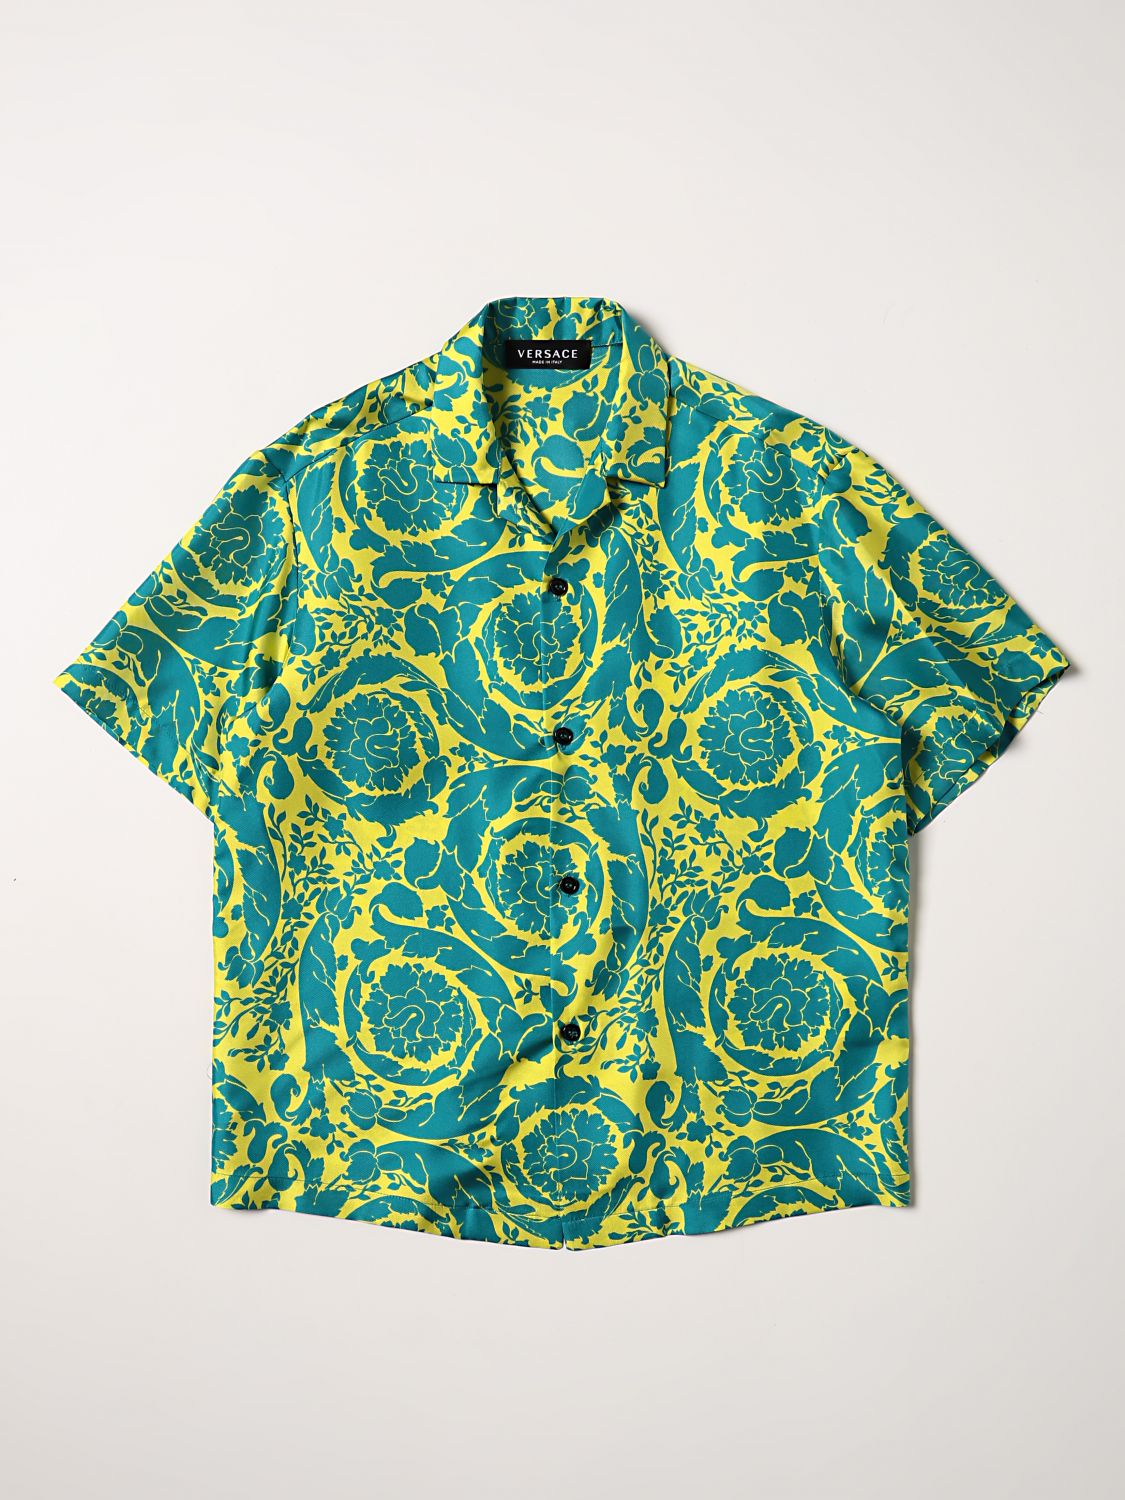 Pidgin Etna Geheim Young Versace Outlet: shirt for boys - Lime | Young Versace shirt  10001071A05227 online on GIGLIO.COM